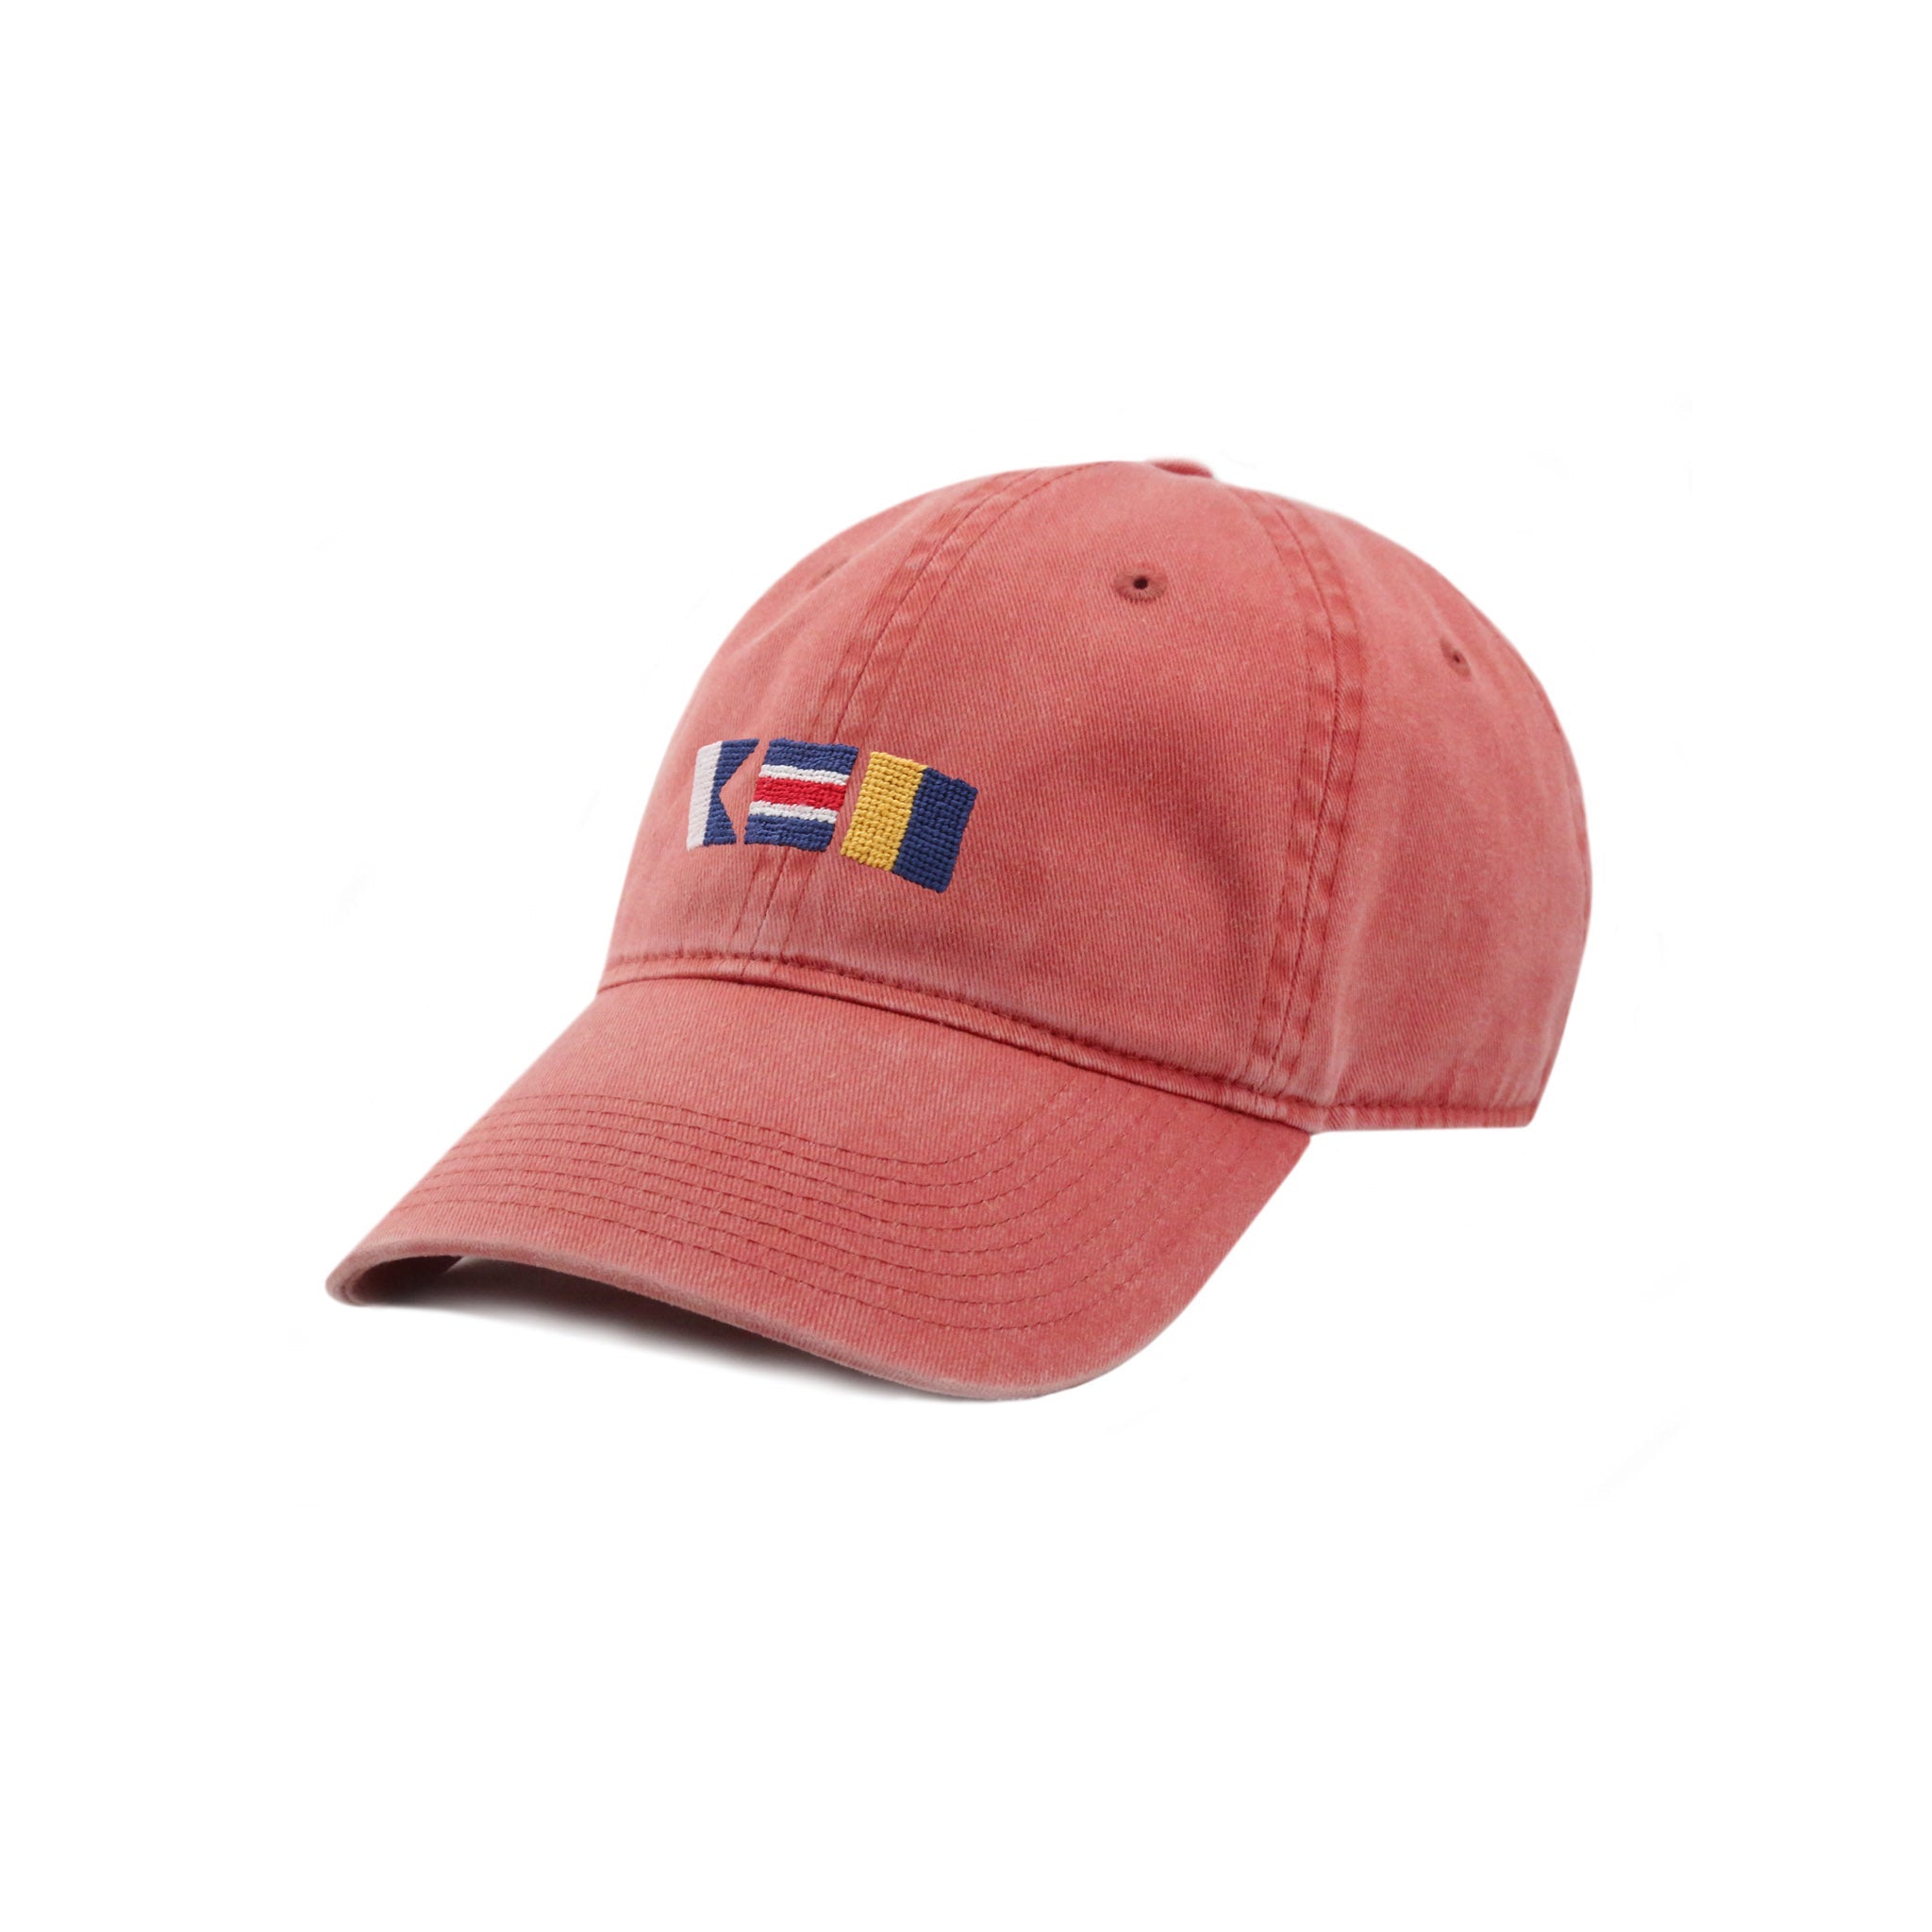 Black Lab Walking Hat (Nantucket Red) at Smathers and Branson